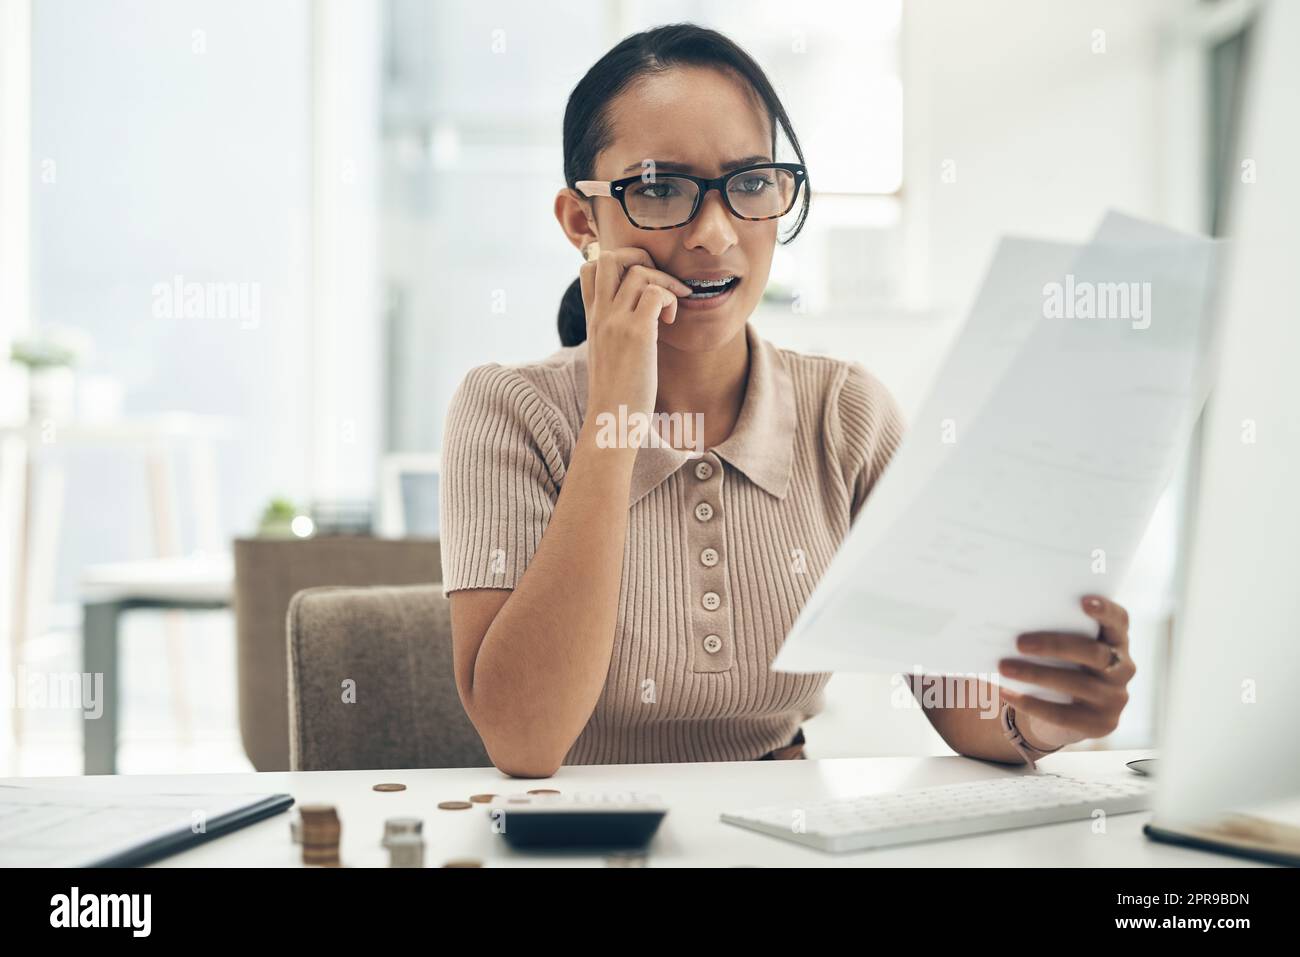 Bad budgeting can lead to more financial stress. a young businesswoman looking stressed out while calculating finances in an office. Stock Photo